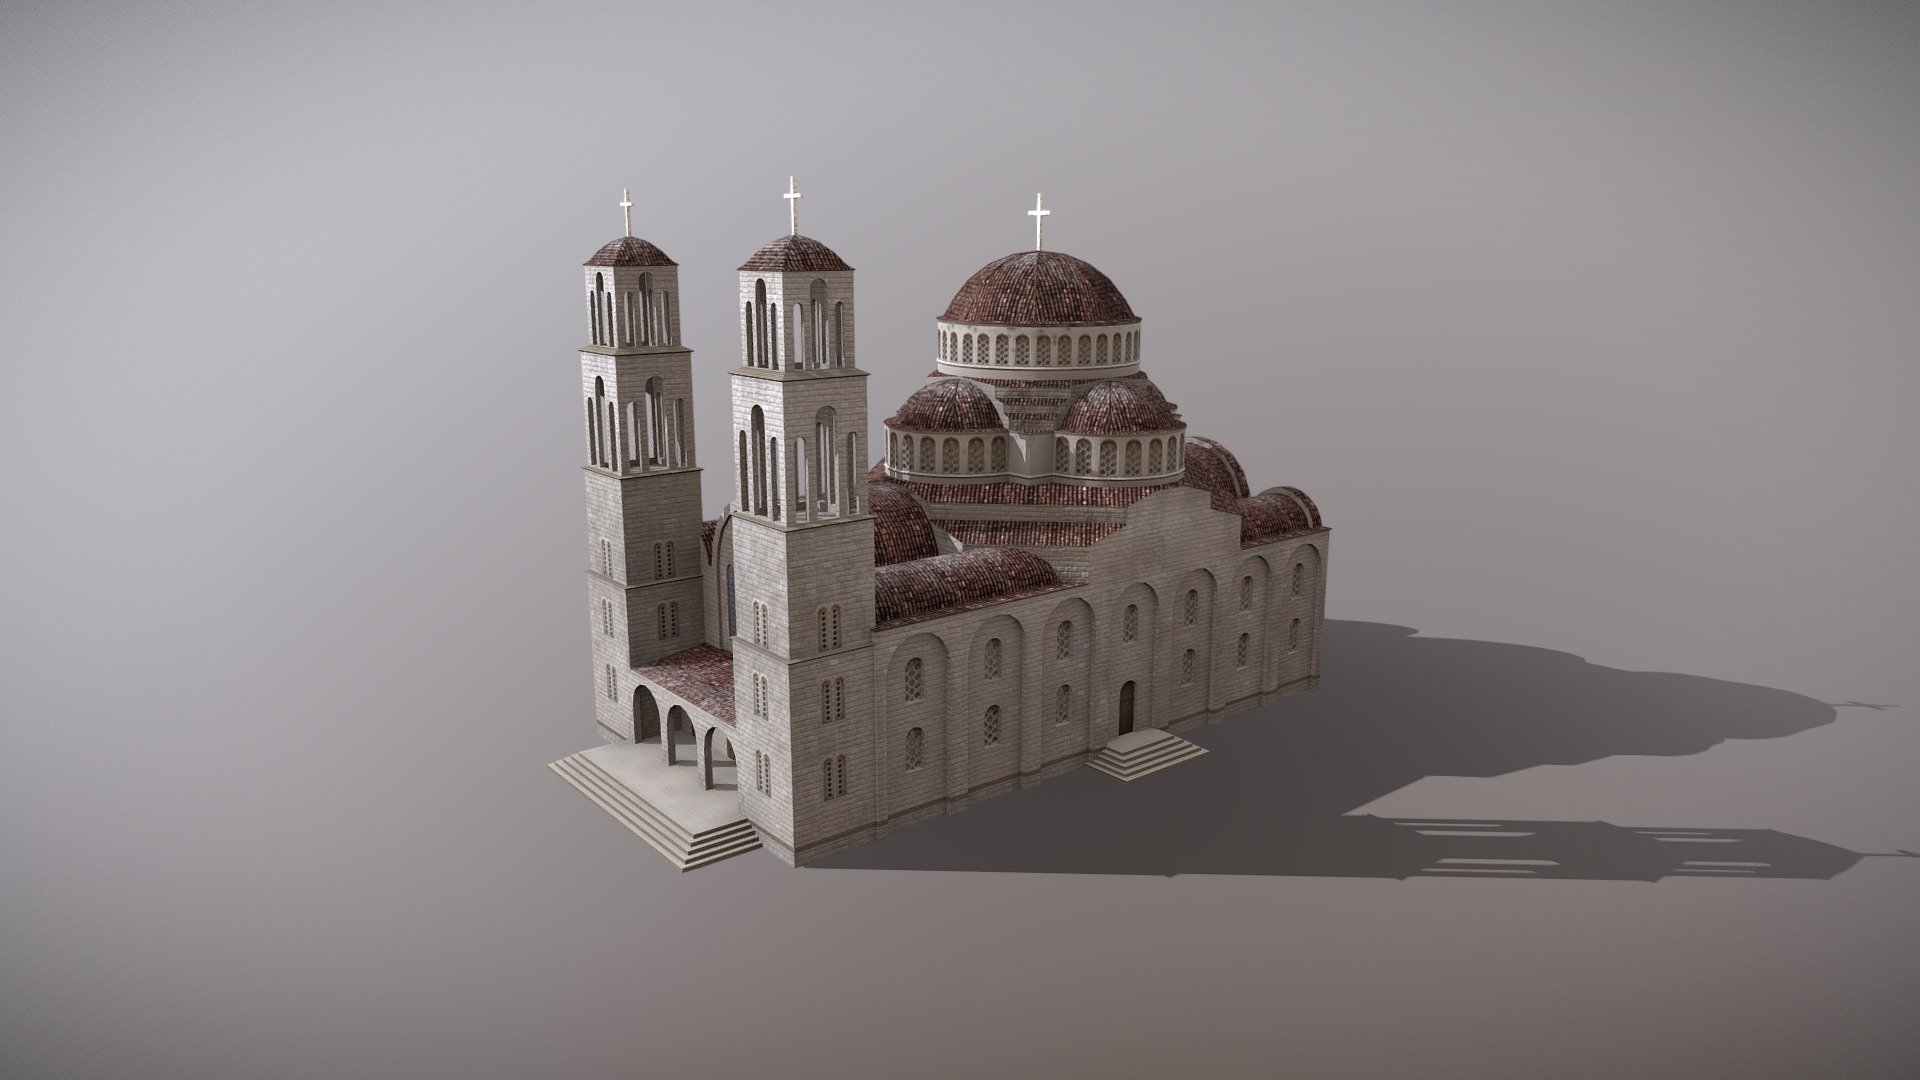 Grand_Byzantine_Church




LOD0 - (triangles 9148) / (points 4536)

LOD1 - (triangles 5528) / (points 2795)

LOD2 - (triangles 522) / (points 294)

Low-poly 3D model Church with LODs




Textures for PBR shader (Albedo, AmbietOcclusion, Gloss, Specular, NormalMap, Emission) they may be used with Unity3D, Unreal Engine. 

All pictures (previews) REALTIME rendering

Textures for NIGHT


Сontains 3 LODs




Textures:




Grand_Byzantine_Church_Albedo.png     - 2048x2048

Grand_Byzantine_Church_AmbietOcclusion.png    - 2048x2048

Grand_Byzantine_Church_Gloss.png      - 2048x2048

Grand_Byzantine_Church_Specular.png       - 2048x2048

Grand_Byzantine_Church_NormalMap.png      - 2048x2048 

Grand_Byzantine_Church_Emission.png       - 2048x2048 



If you have questions about my models or need any kind of help, feel free to contact me and i'll do my best to help you 3d model